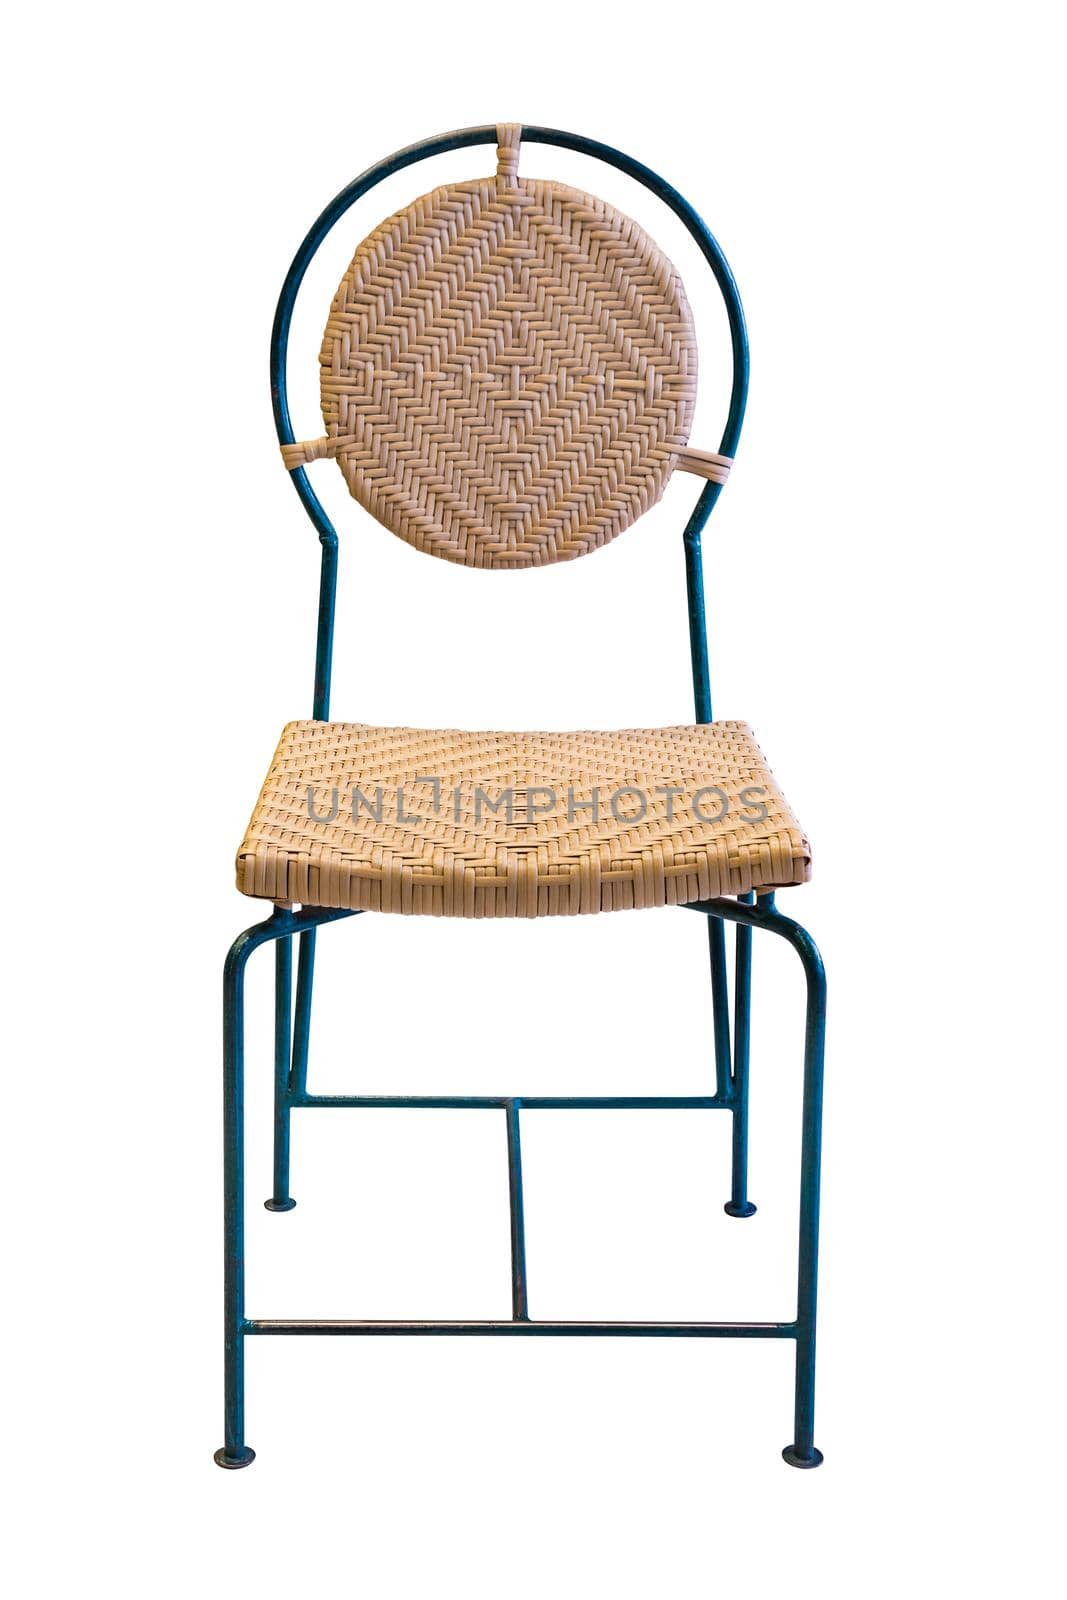 Chair steel legs with rattan cover isolated on white. by NuwatPhoto